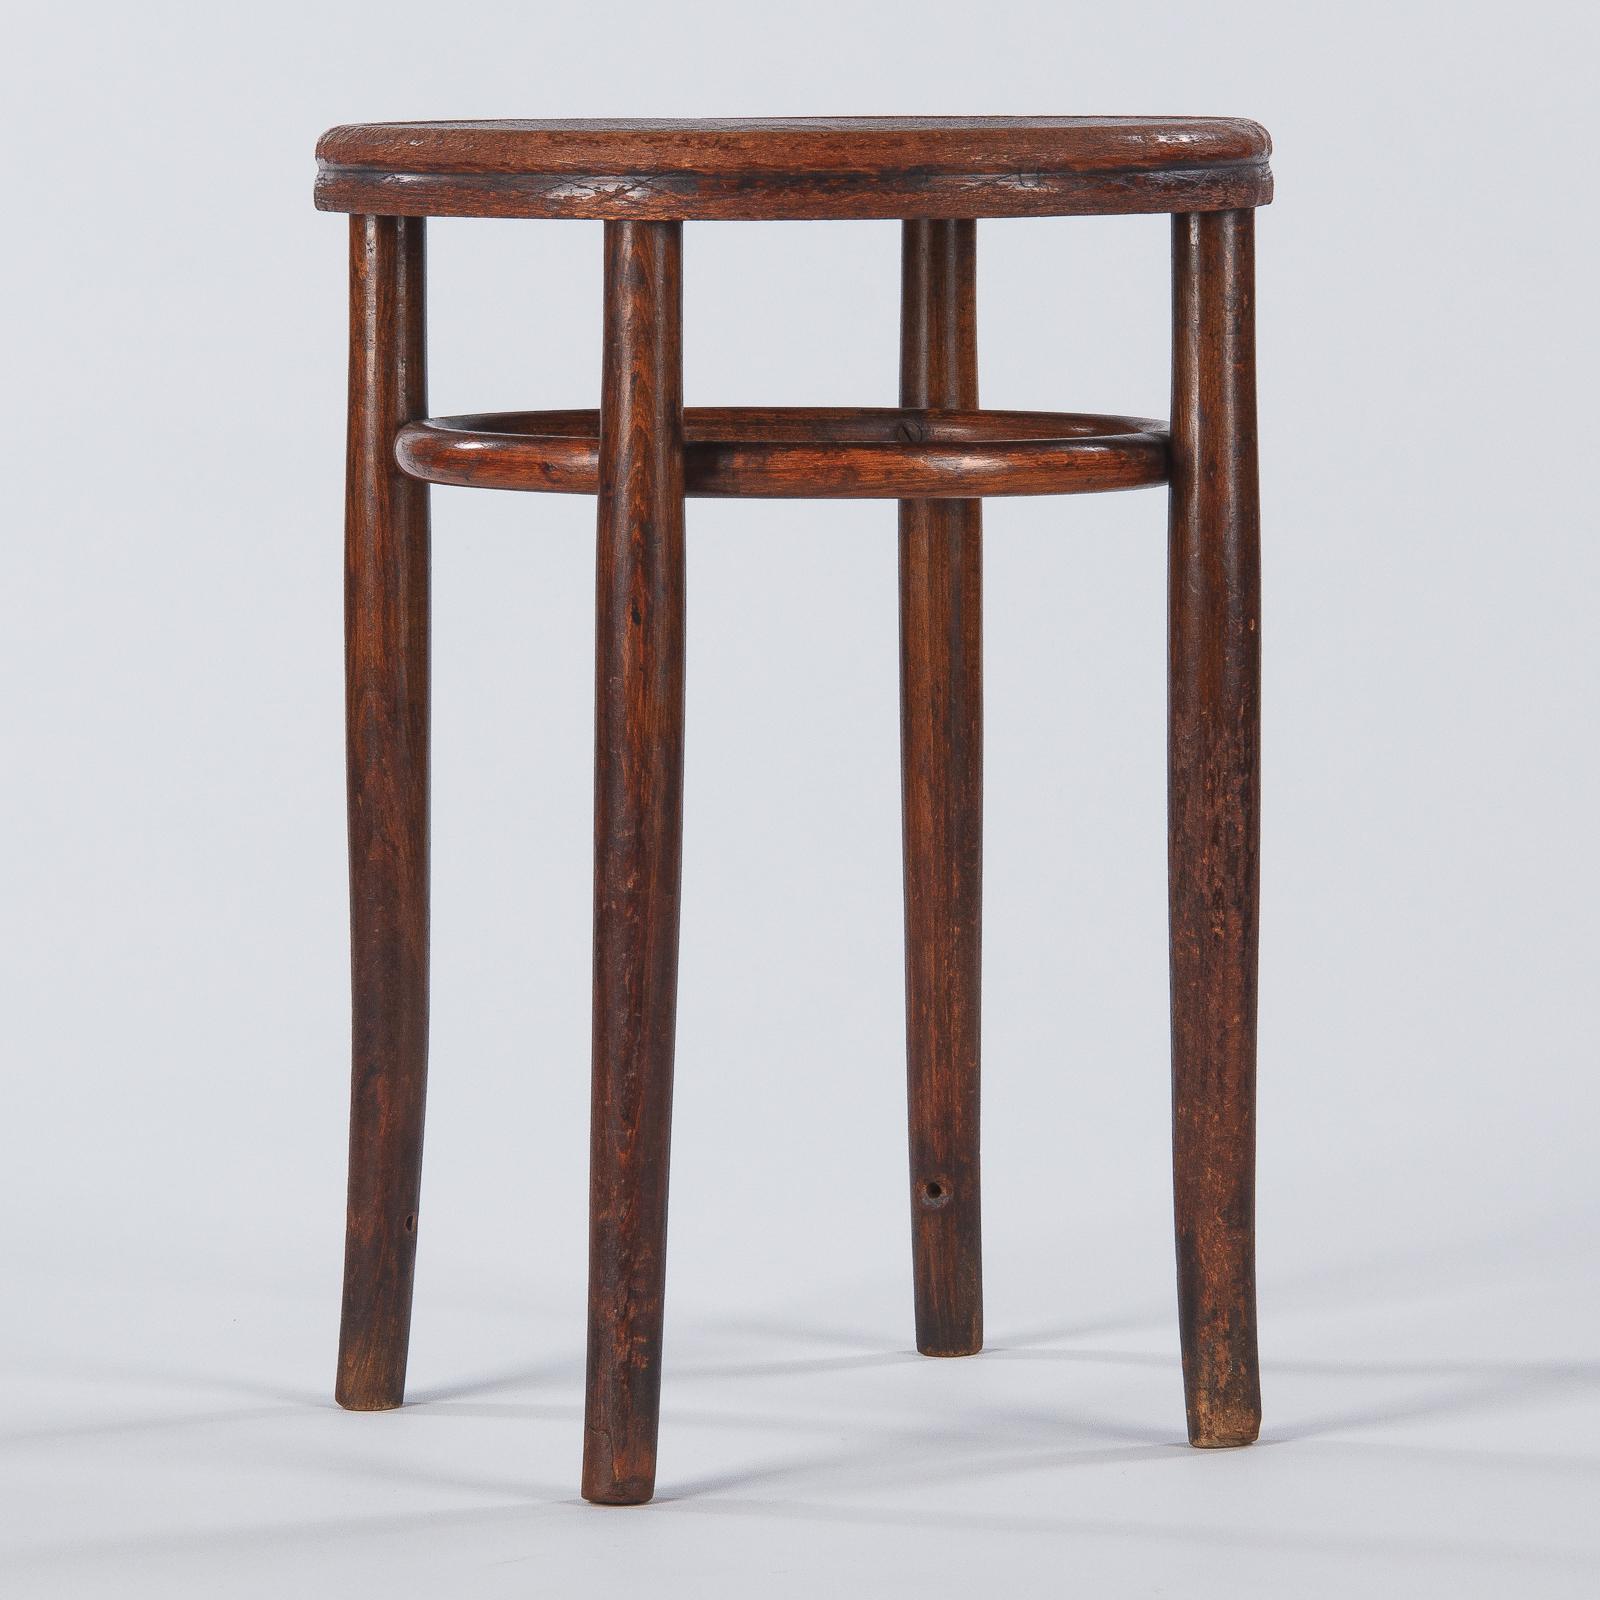 An attractive stool made of bent beechwood from the early 1900s. The stool was made by furniture maker Fischel from Austria that specialized in hotel and restaurants furnishings.